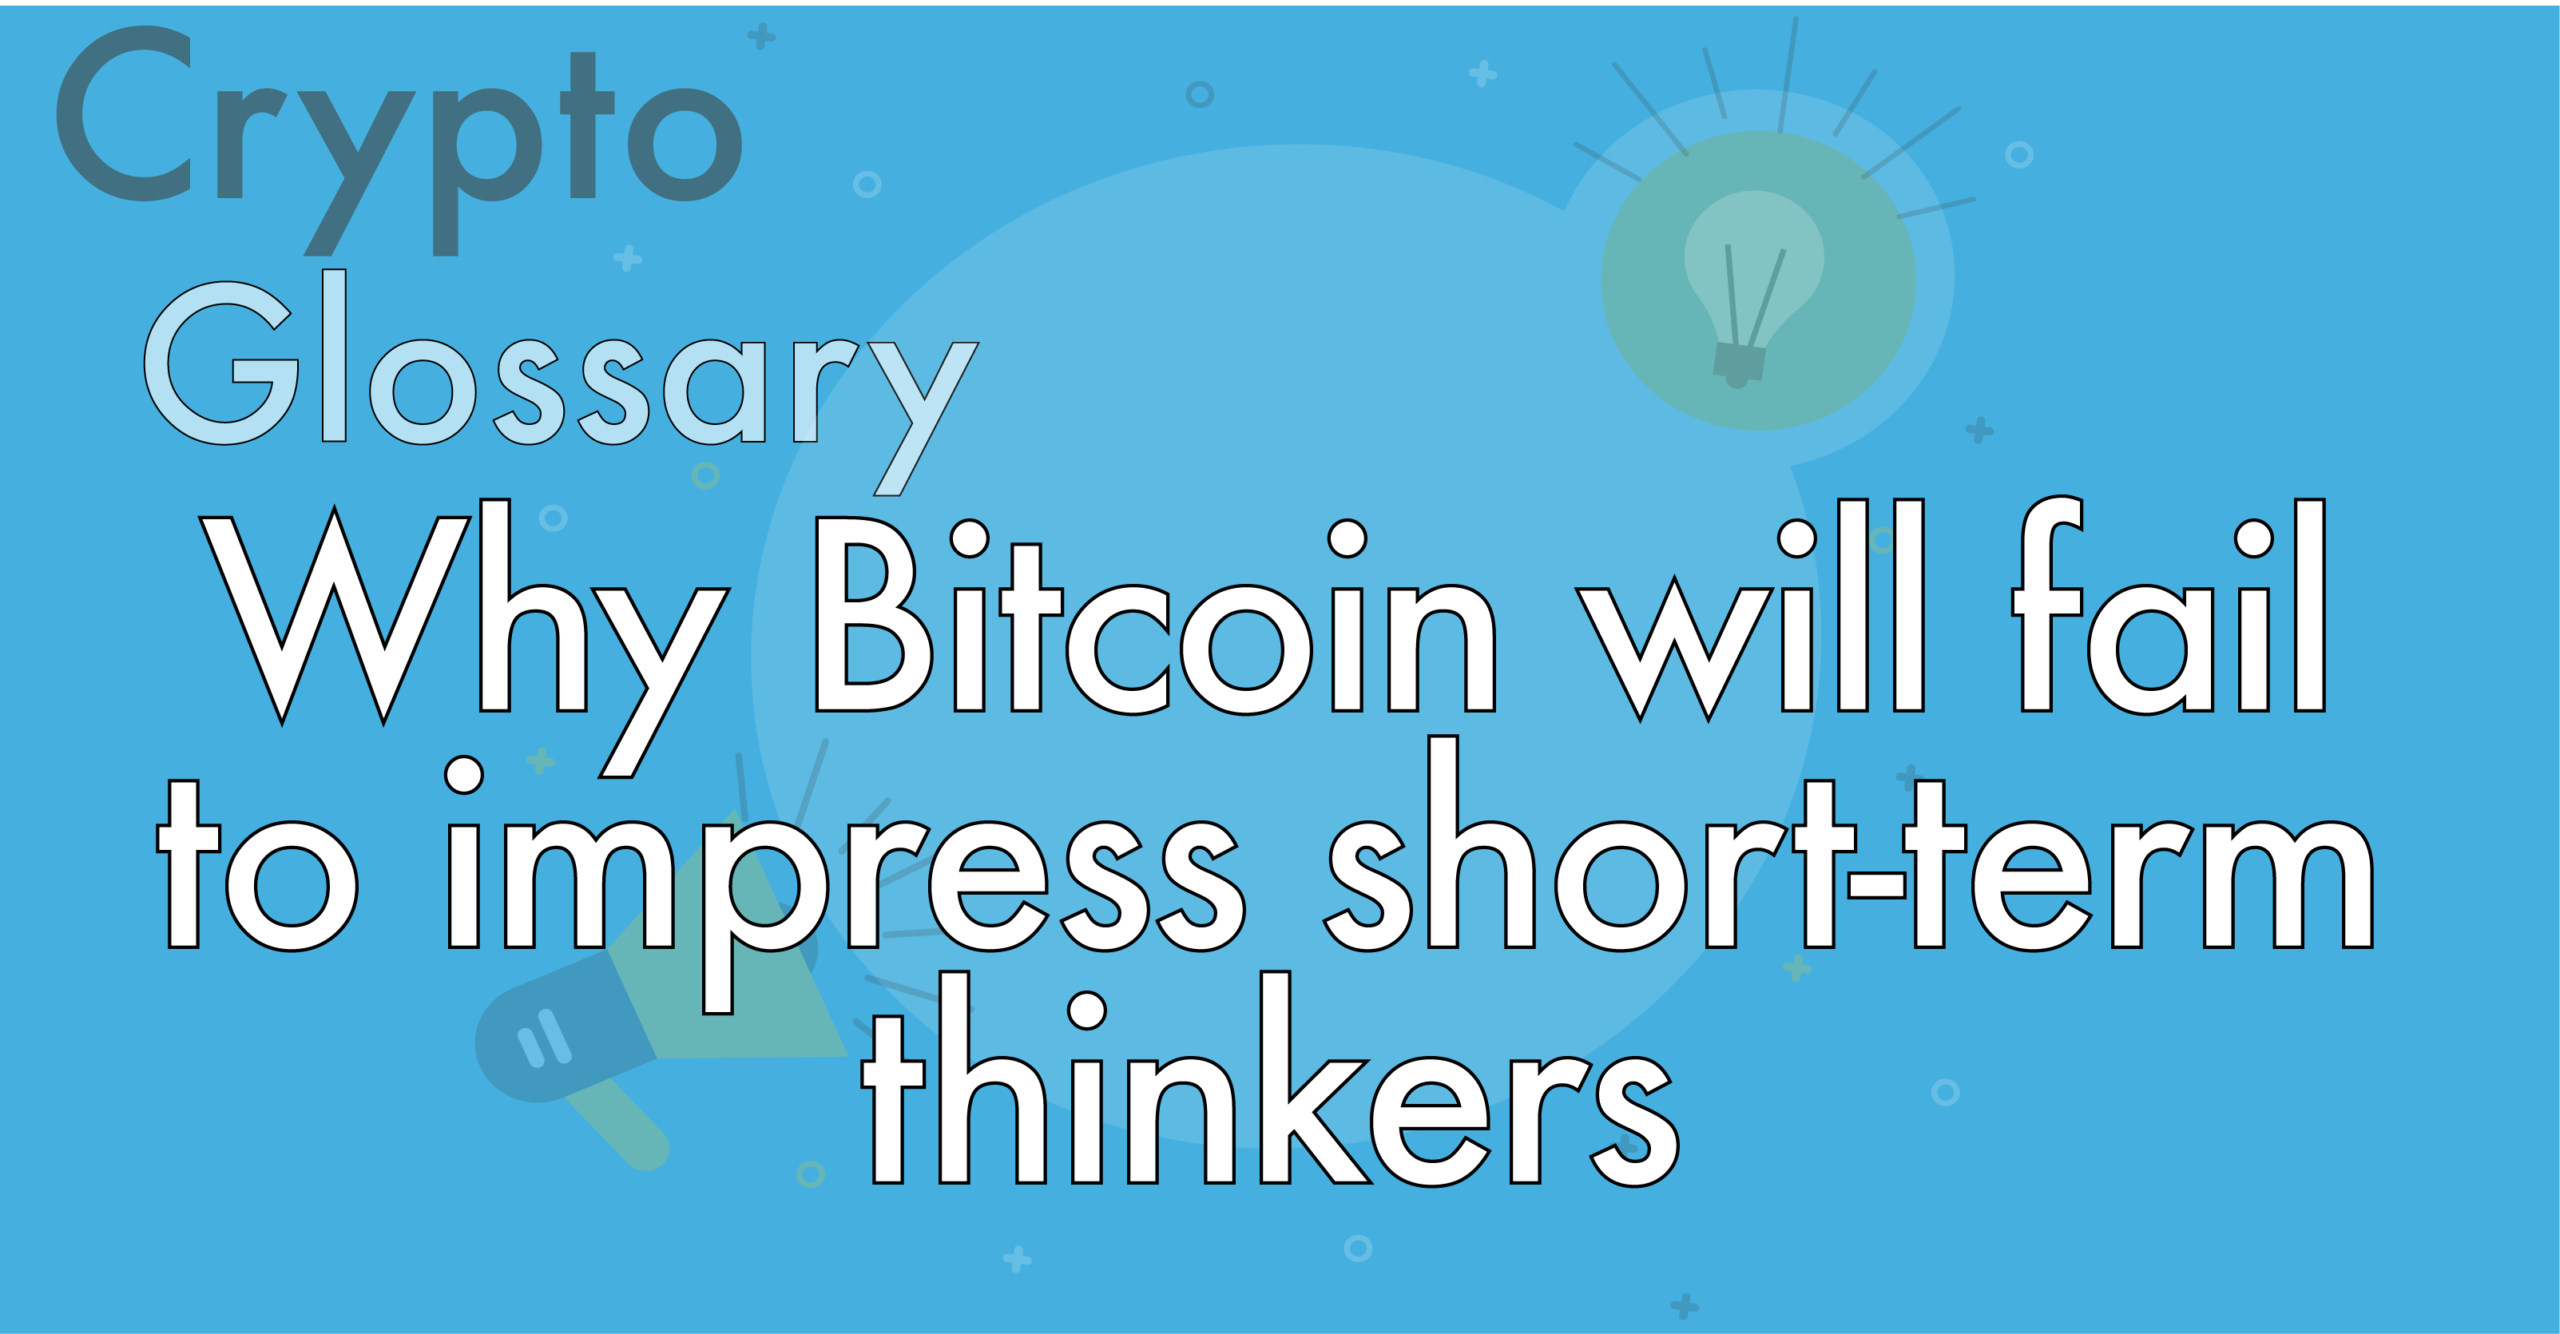 Why Bitcoin Will Fail to Impress the Short-Term Thinkers?